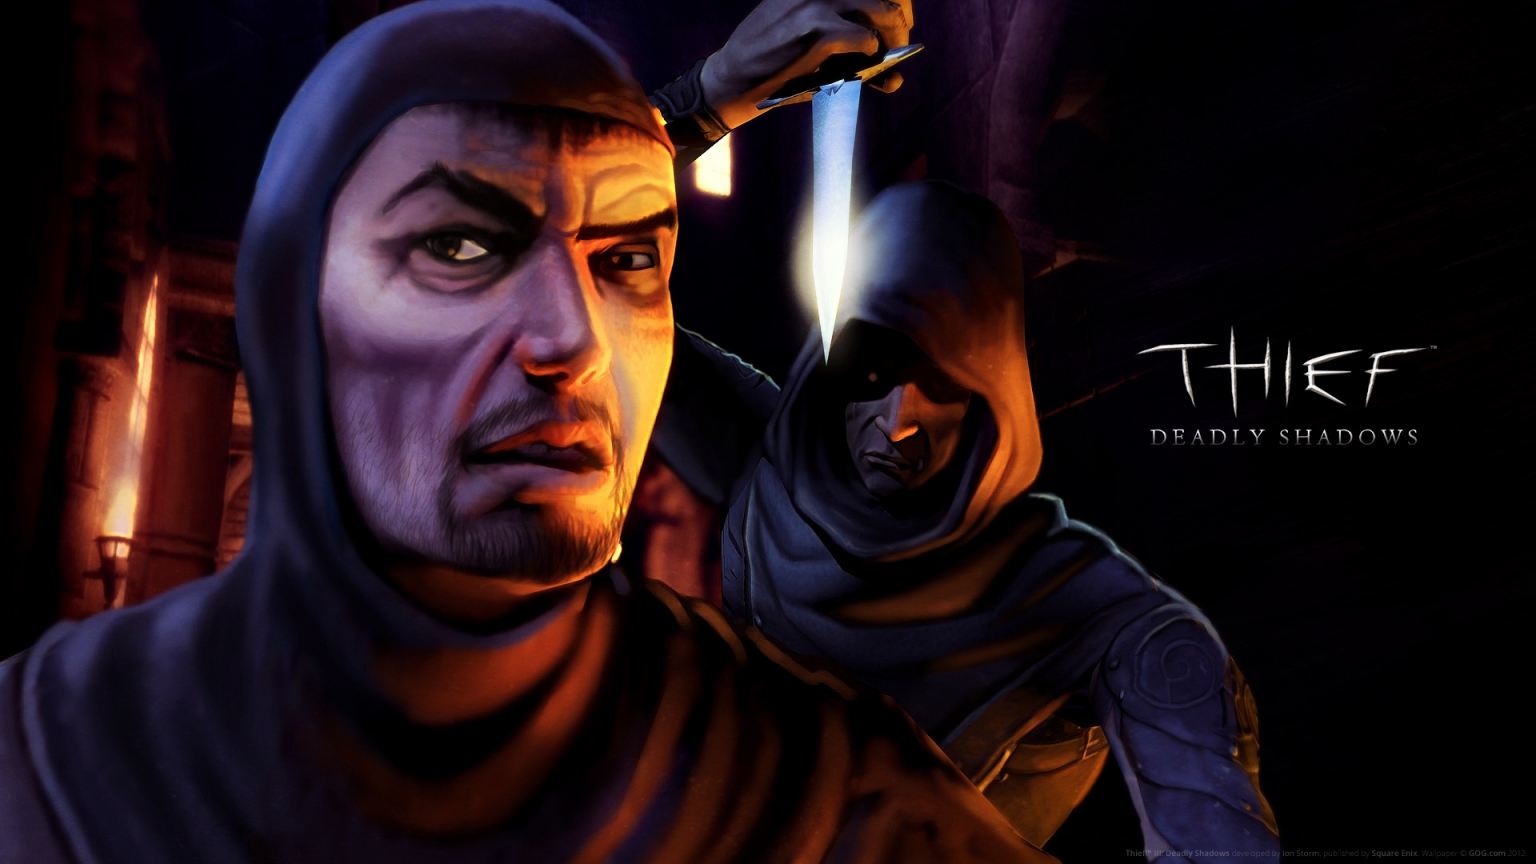 Thief Deadly Shadows for 1536 x 864 HDTV resolution